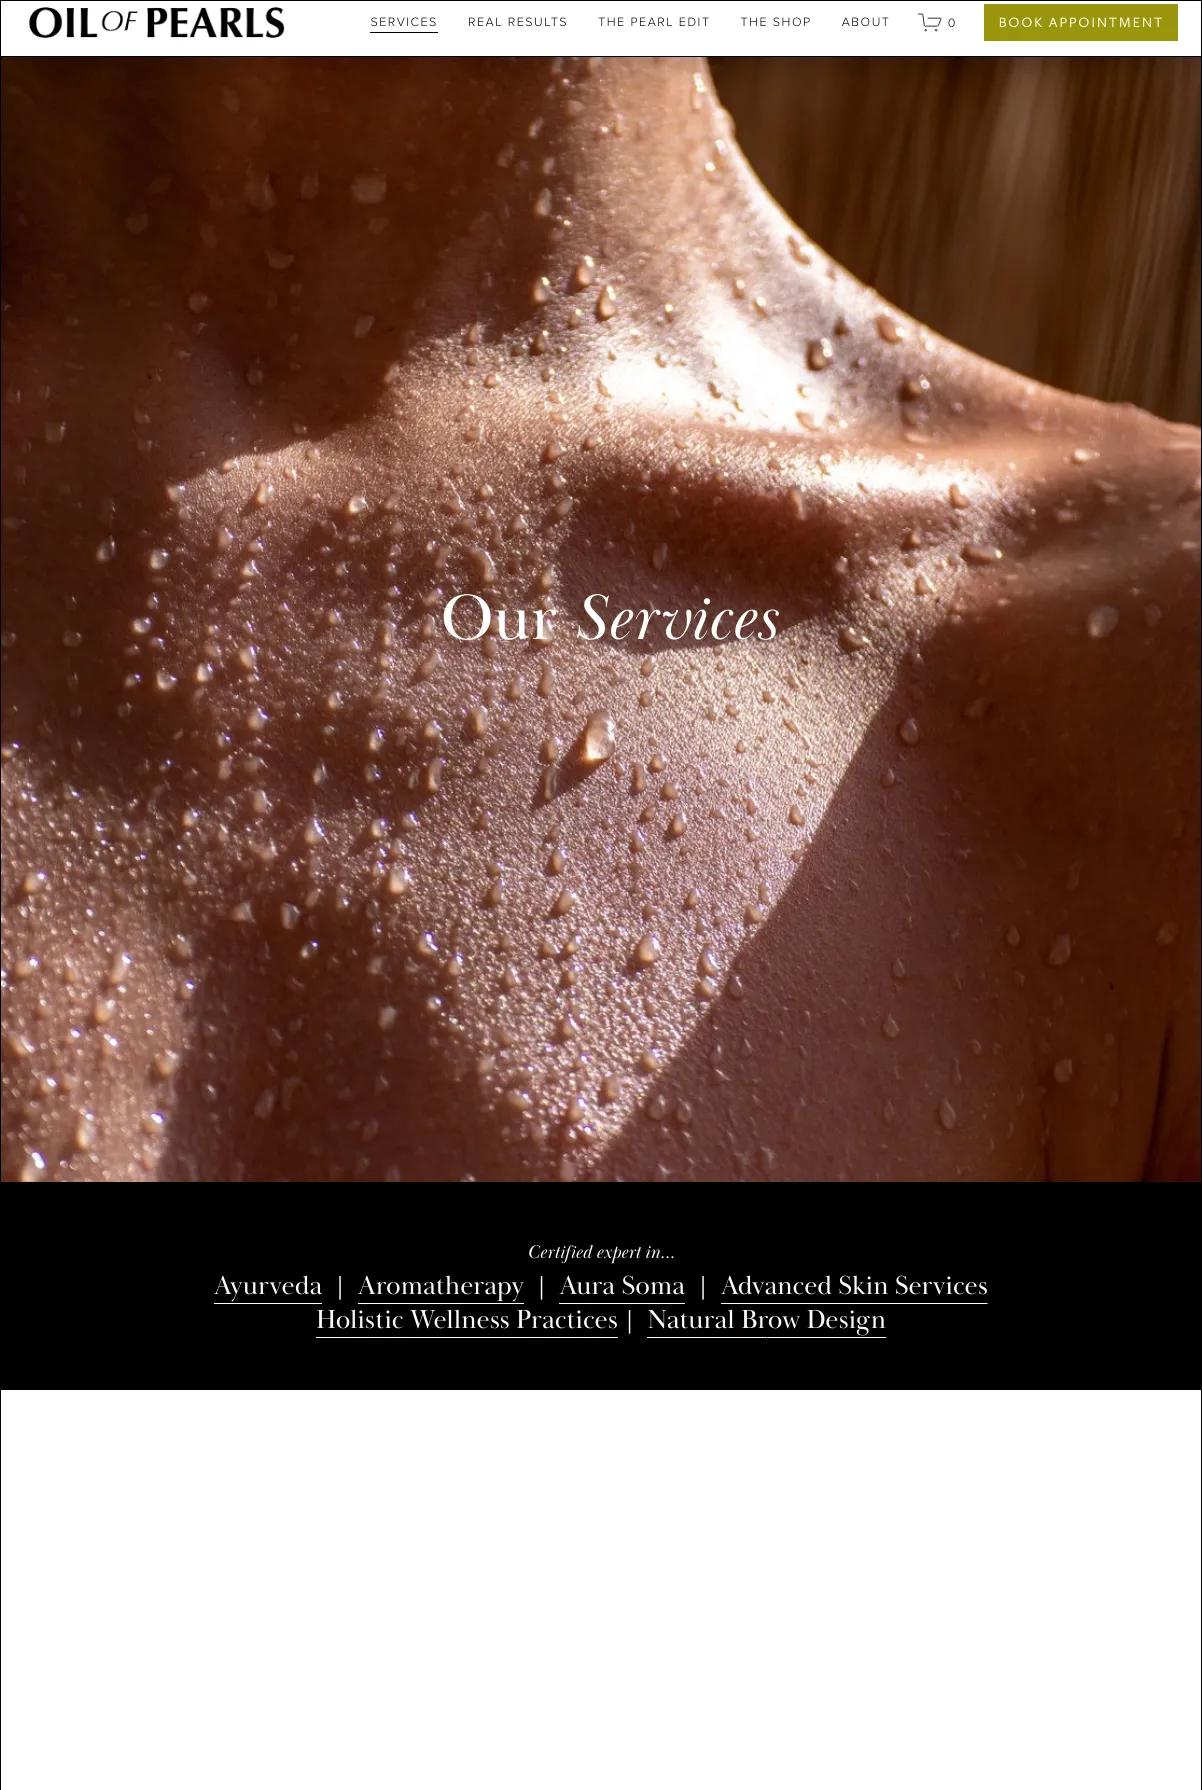 Screenshot 2 of OIL OF PEARLS (Example Squarespace Esthetician Website)